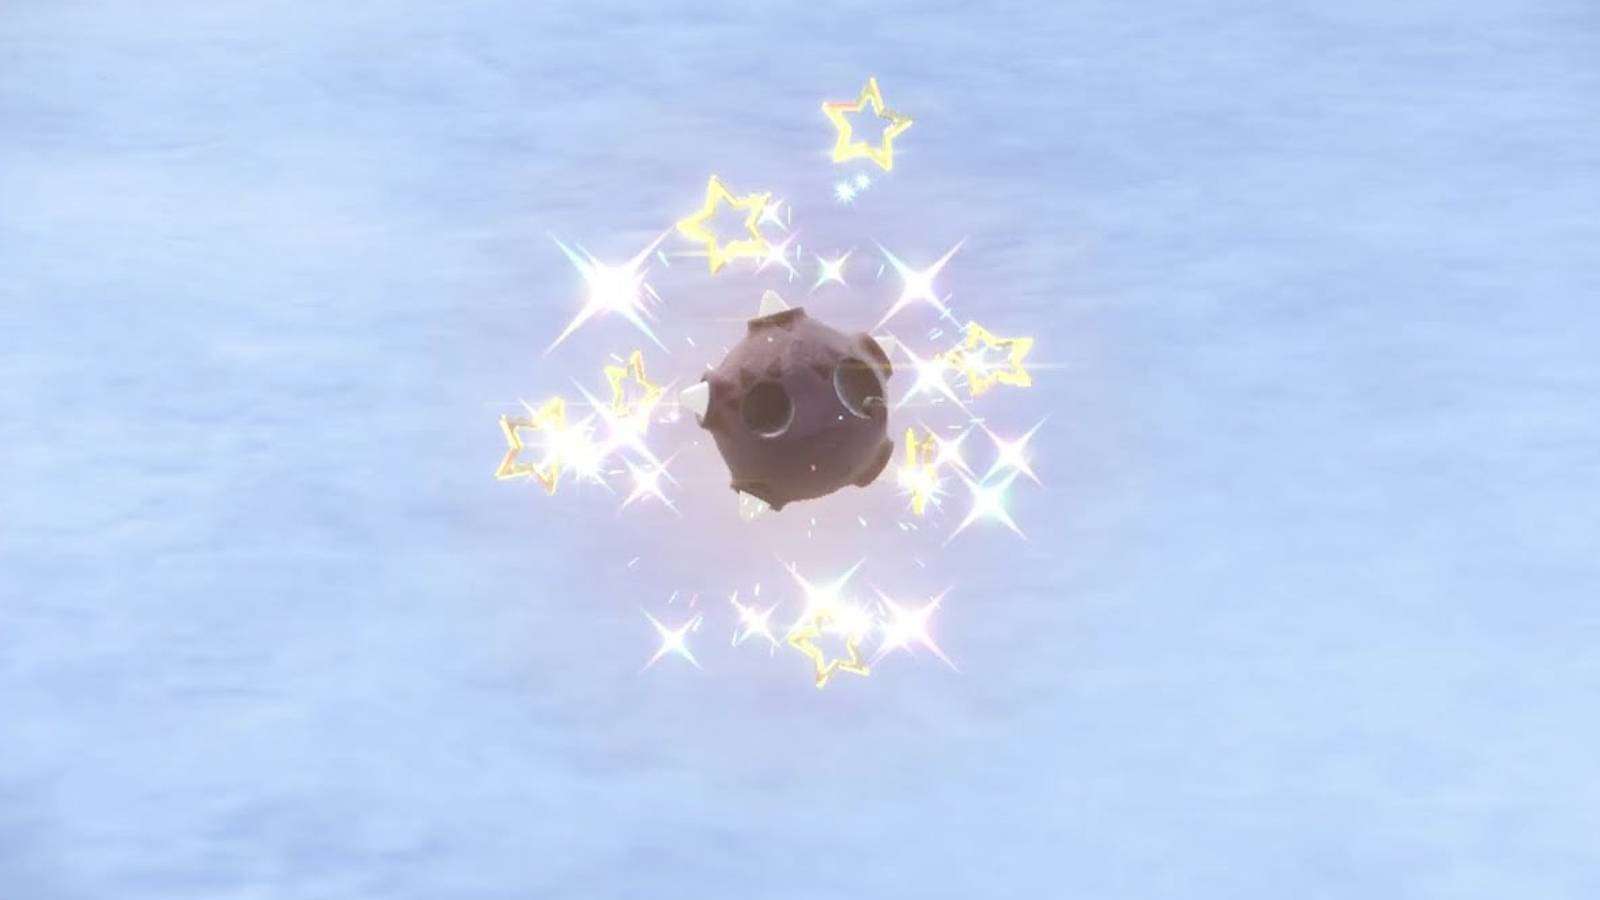 The meteor Pokemon Minior is visible against a snow backdrop, sparkling in its Shiny form